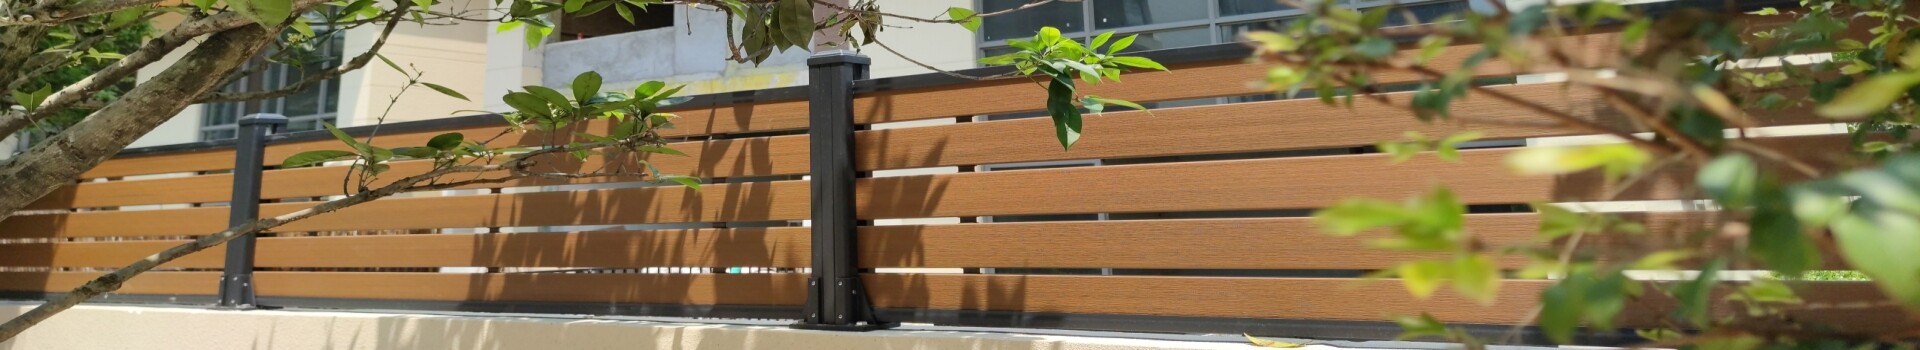 Light Up Your Outdoors with Innovative Fence Lights